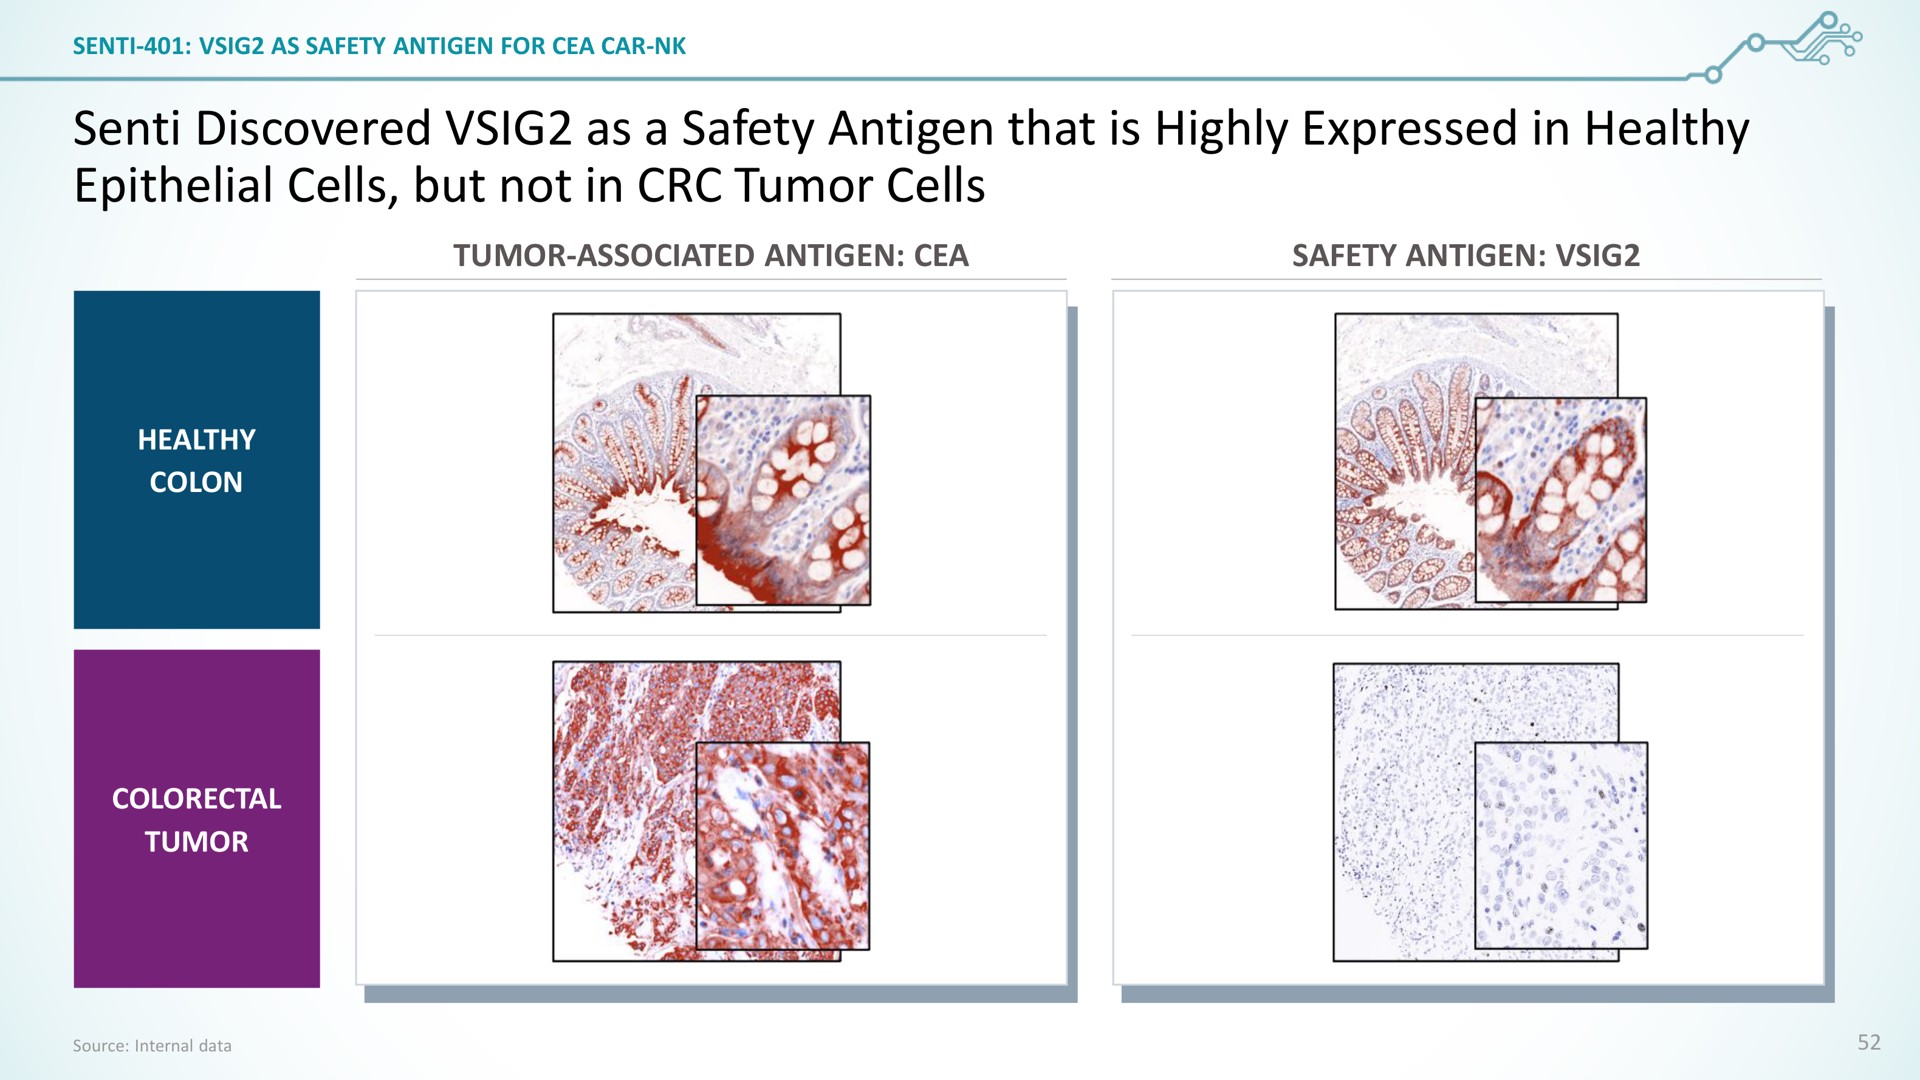 senti discovered as a safety antigen that is highly expressed in healthy epithelial cells but not in tumor cells | SentiBio